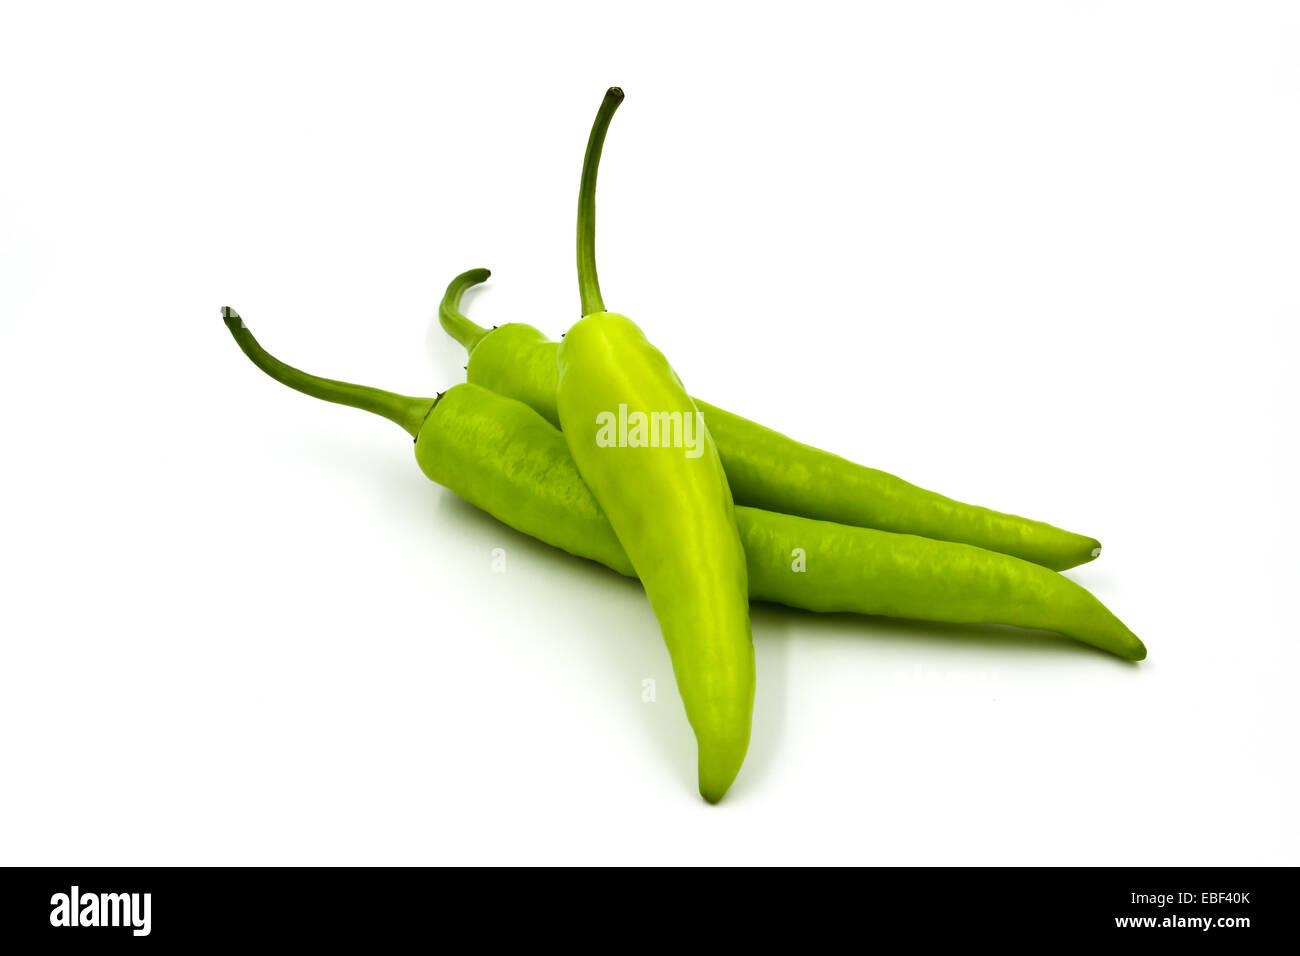 Green chili pepper isolated on a white background Stock Photo